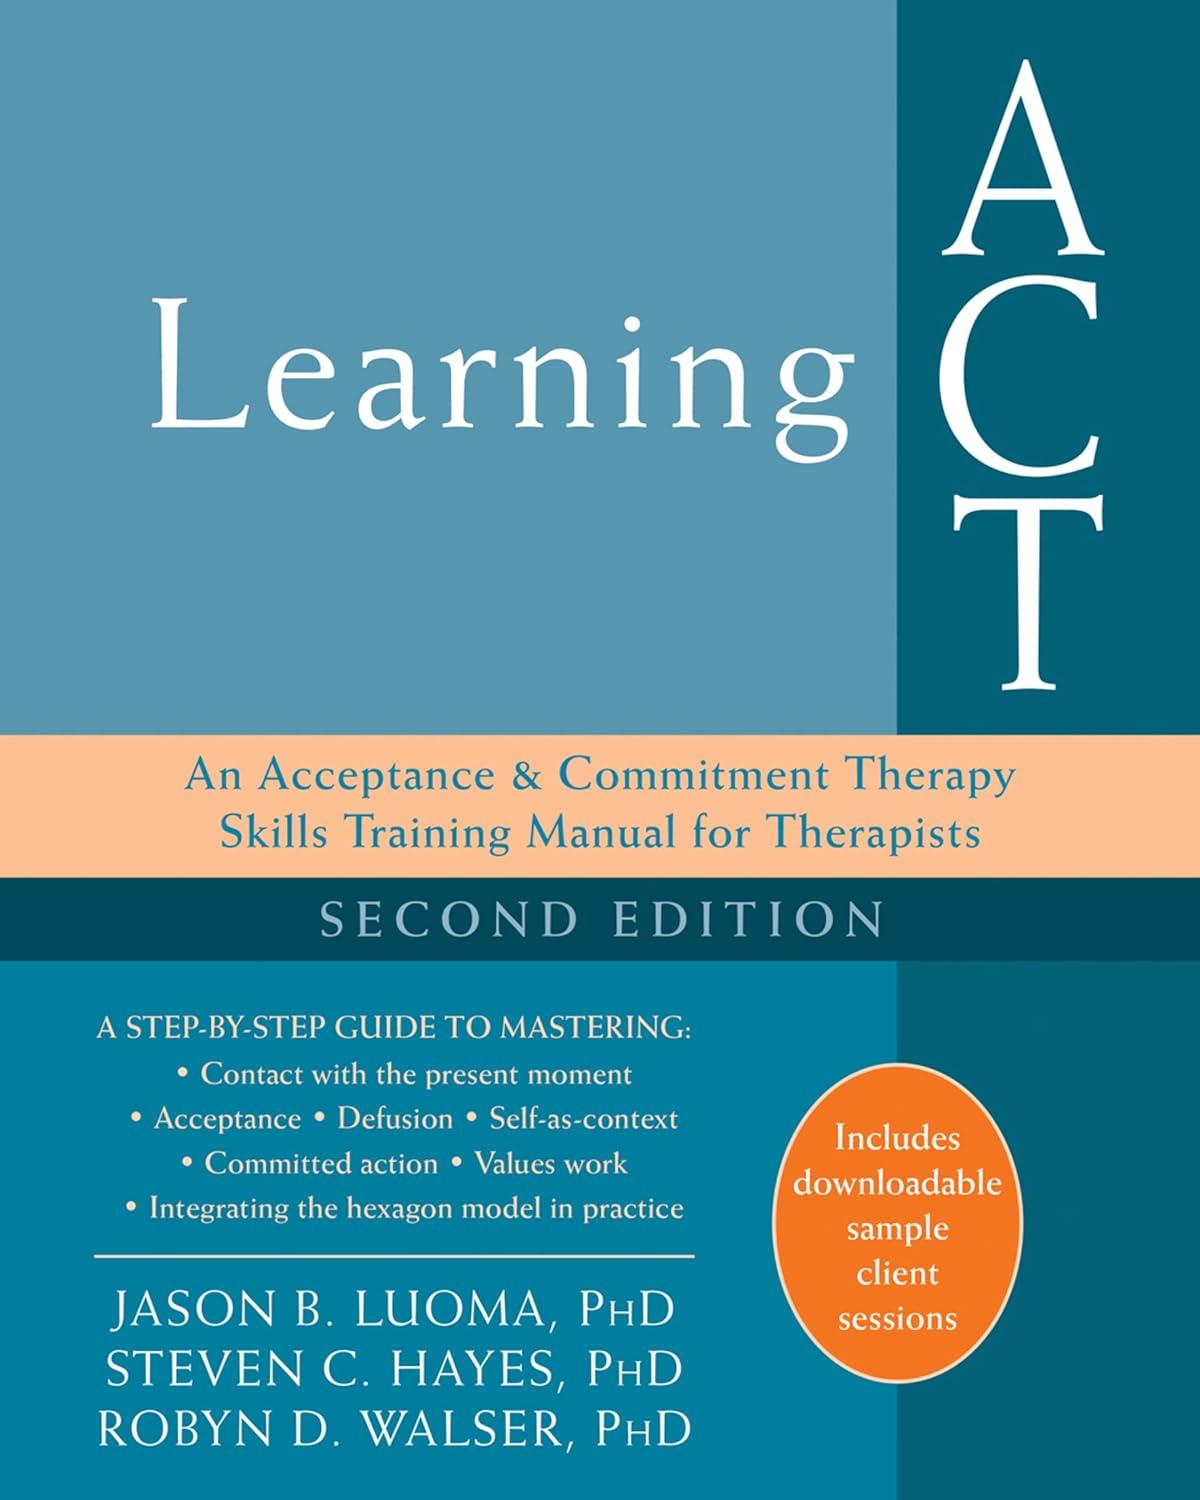 learning act an acceptance and commitment therapy skills training manual for therapists 2nd edition jason b.